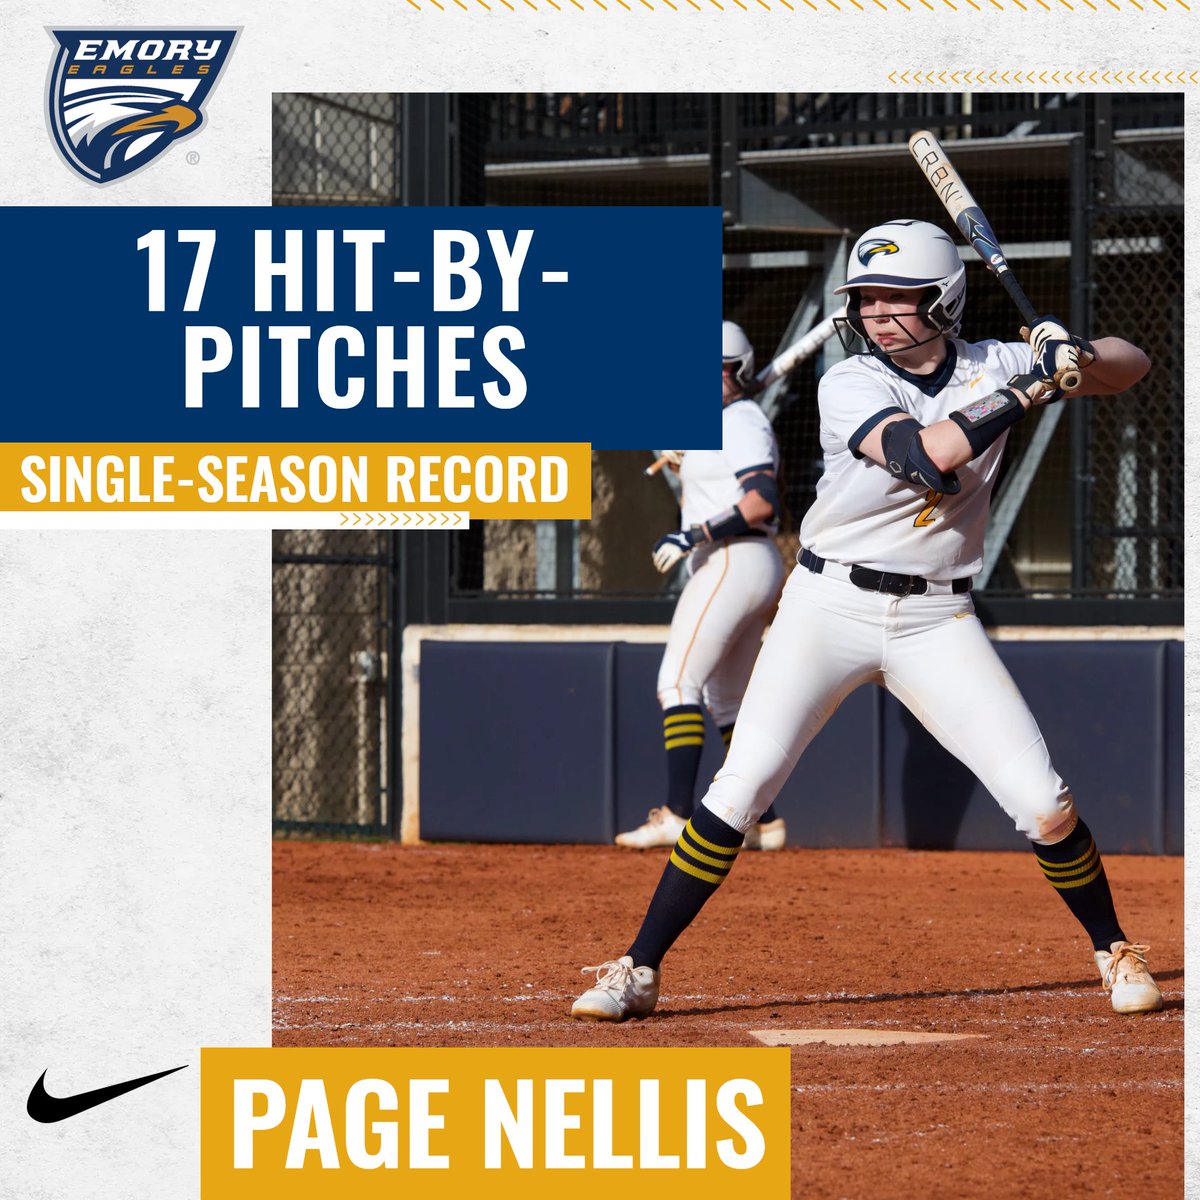 The All-Time HBP Queen strikes again! 👑 Page Nellis breaks her own single-season program record with her 17th hit-by-pitch this afternoon! She also extends her career record to 45! #FlyHigher